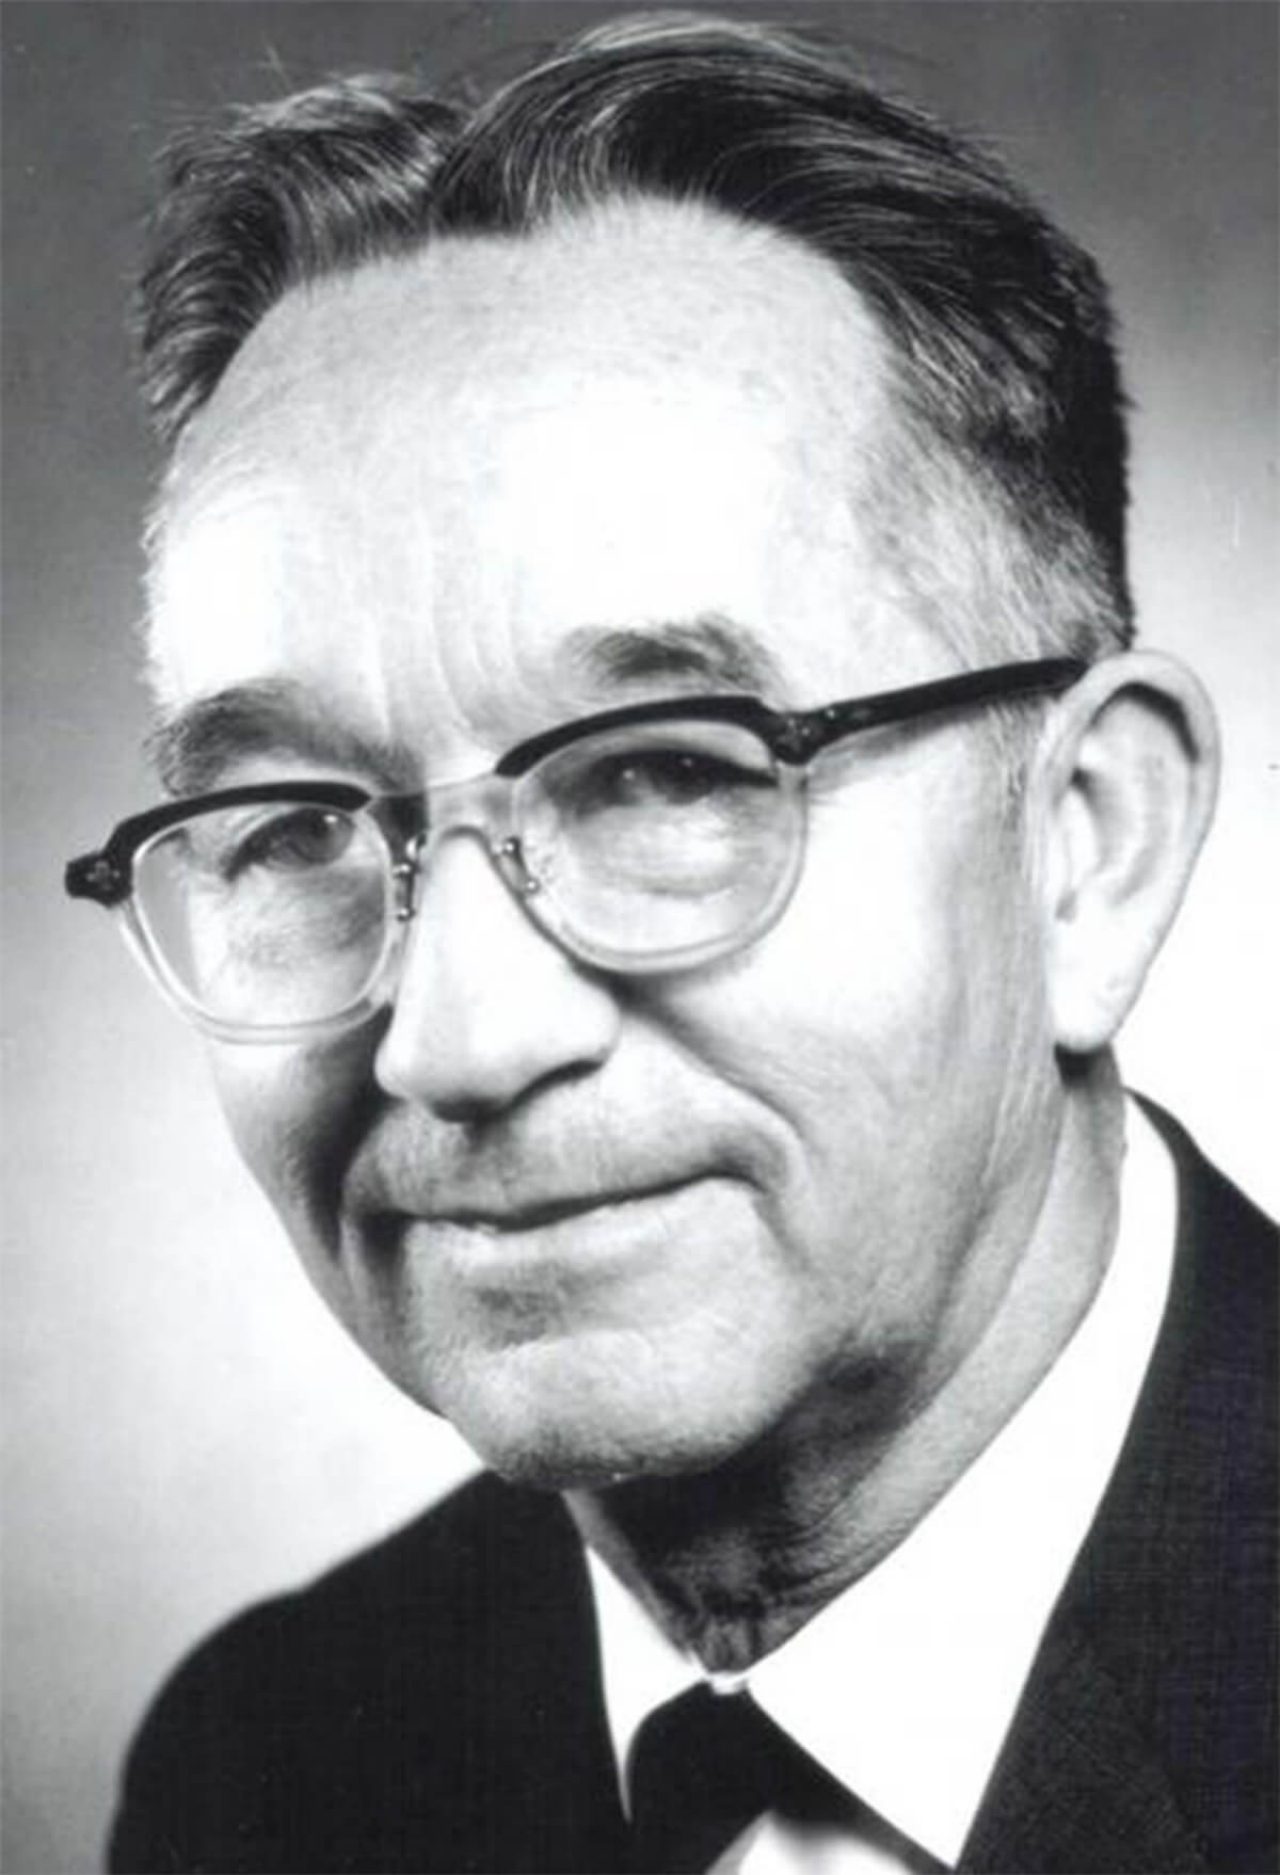 Corning’s Dr. J. Franklin Hyde invented fused silica in the 1930s.